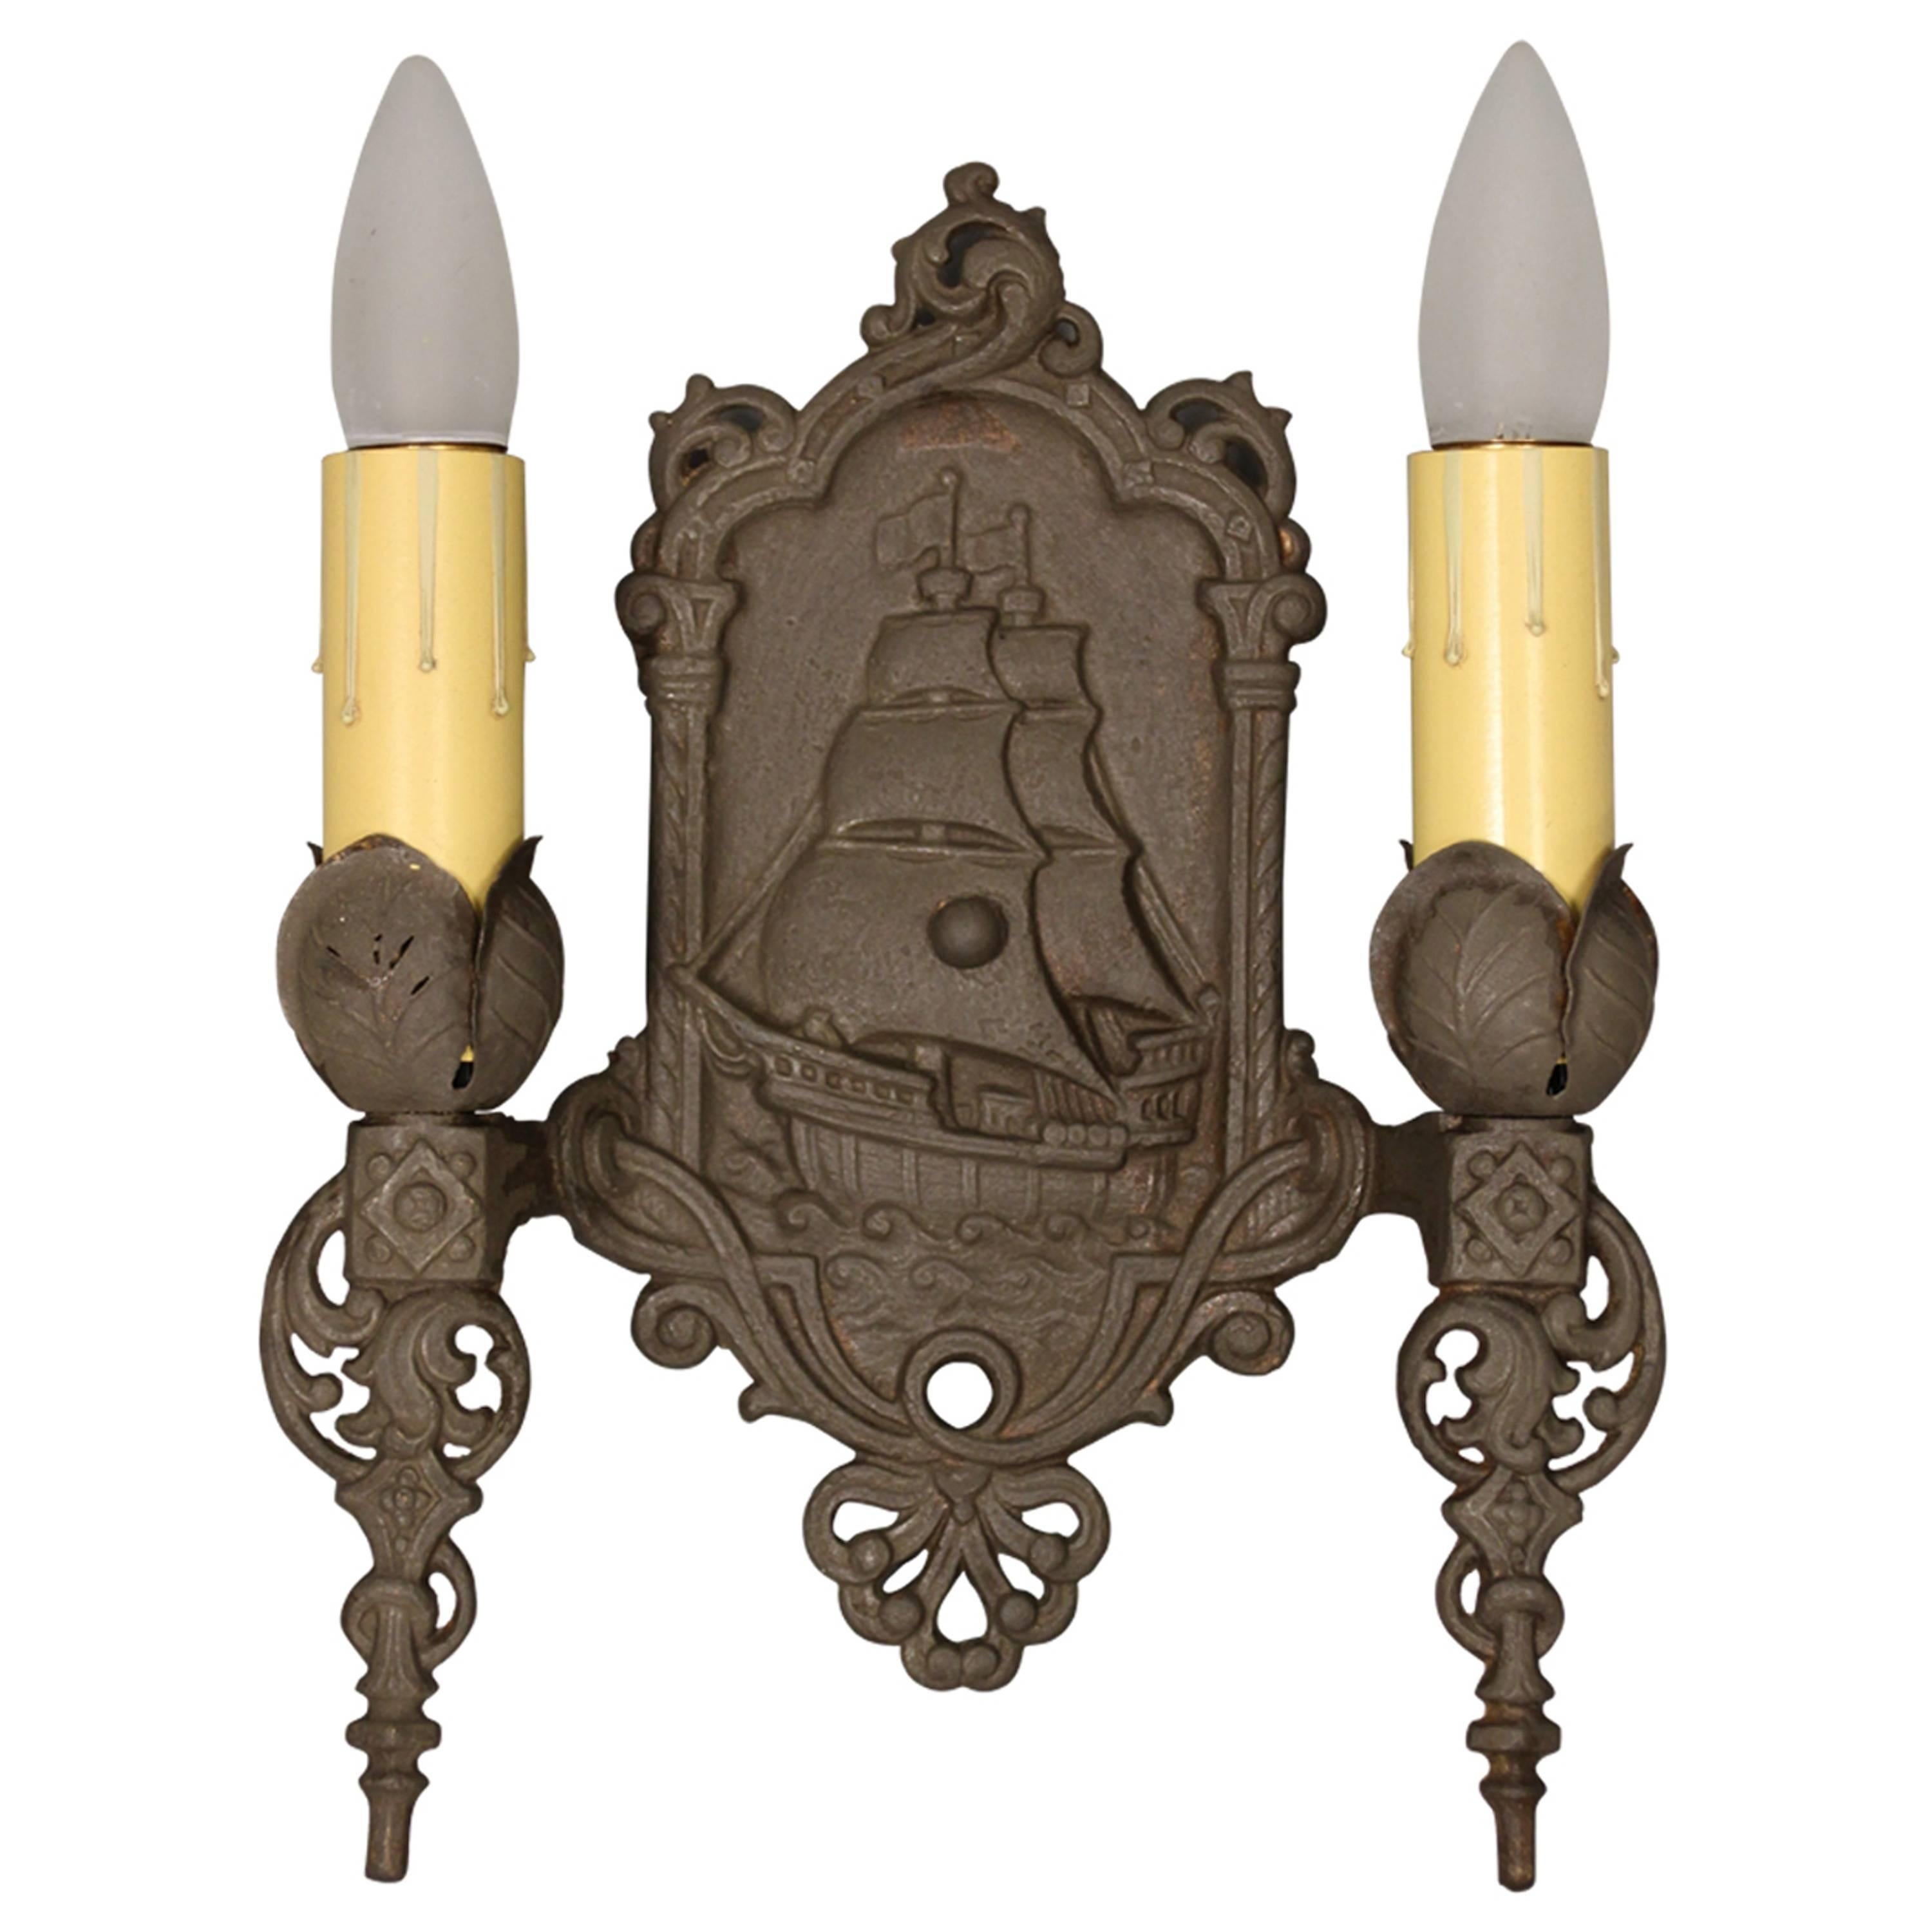 1 of 3 Antique Double Sconce With Galleon Motif